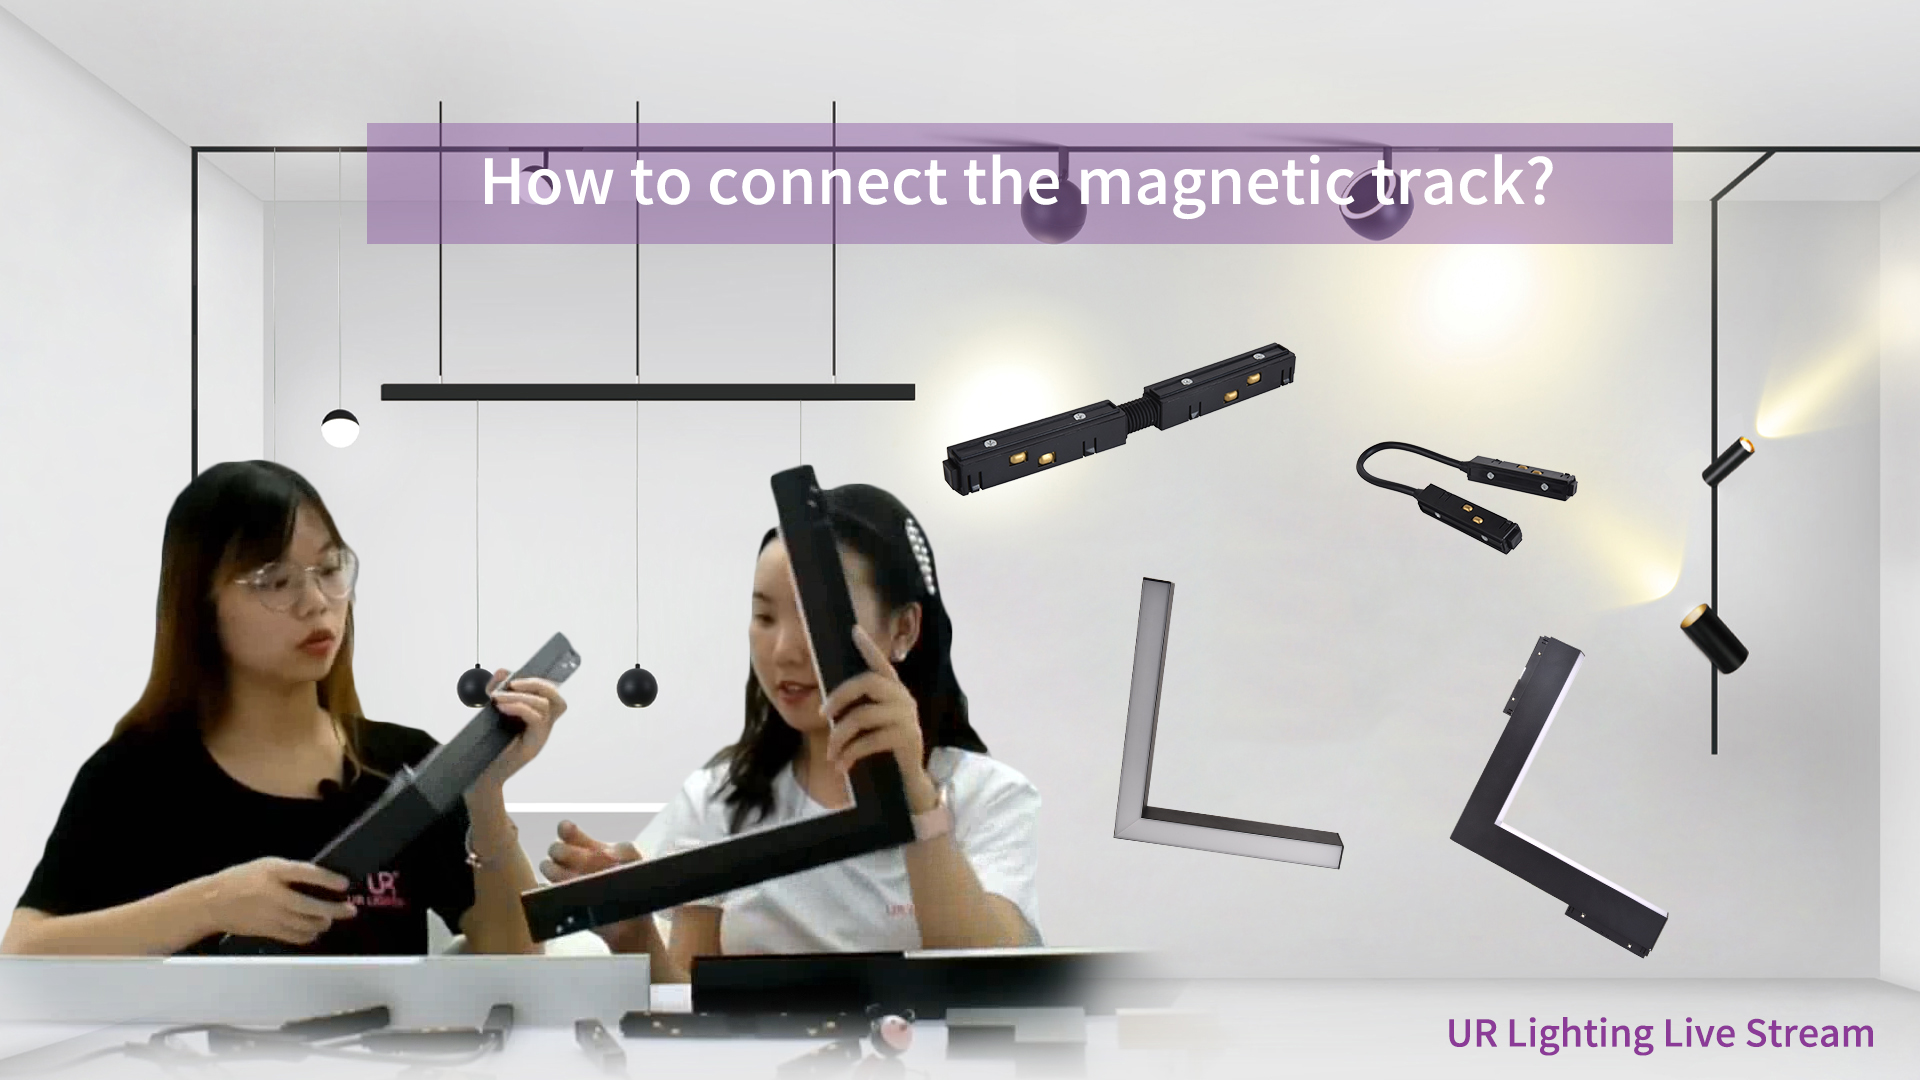 How to connect the magnetic track?